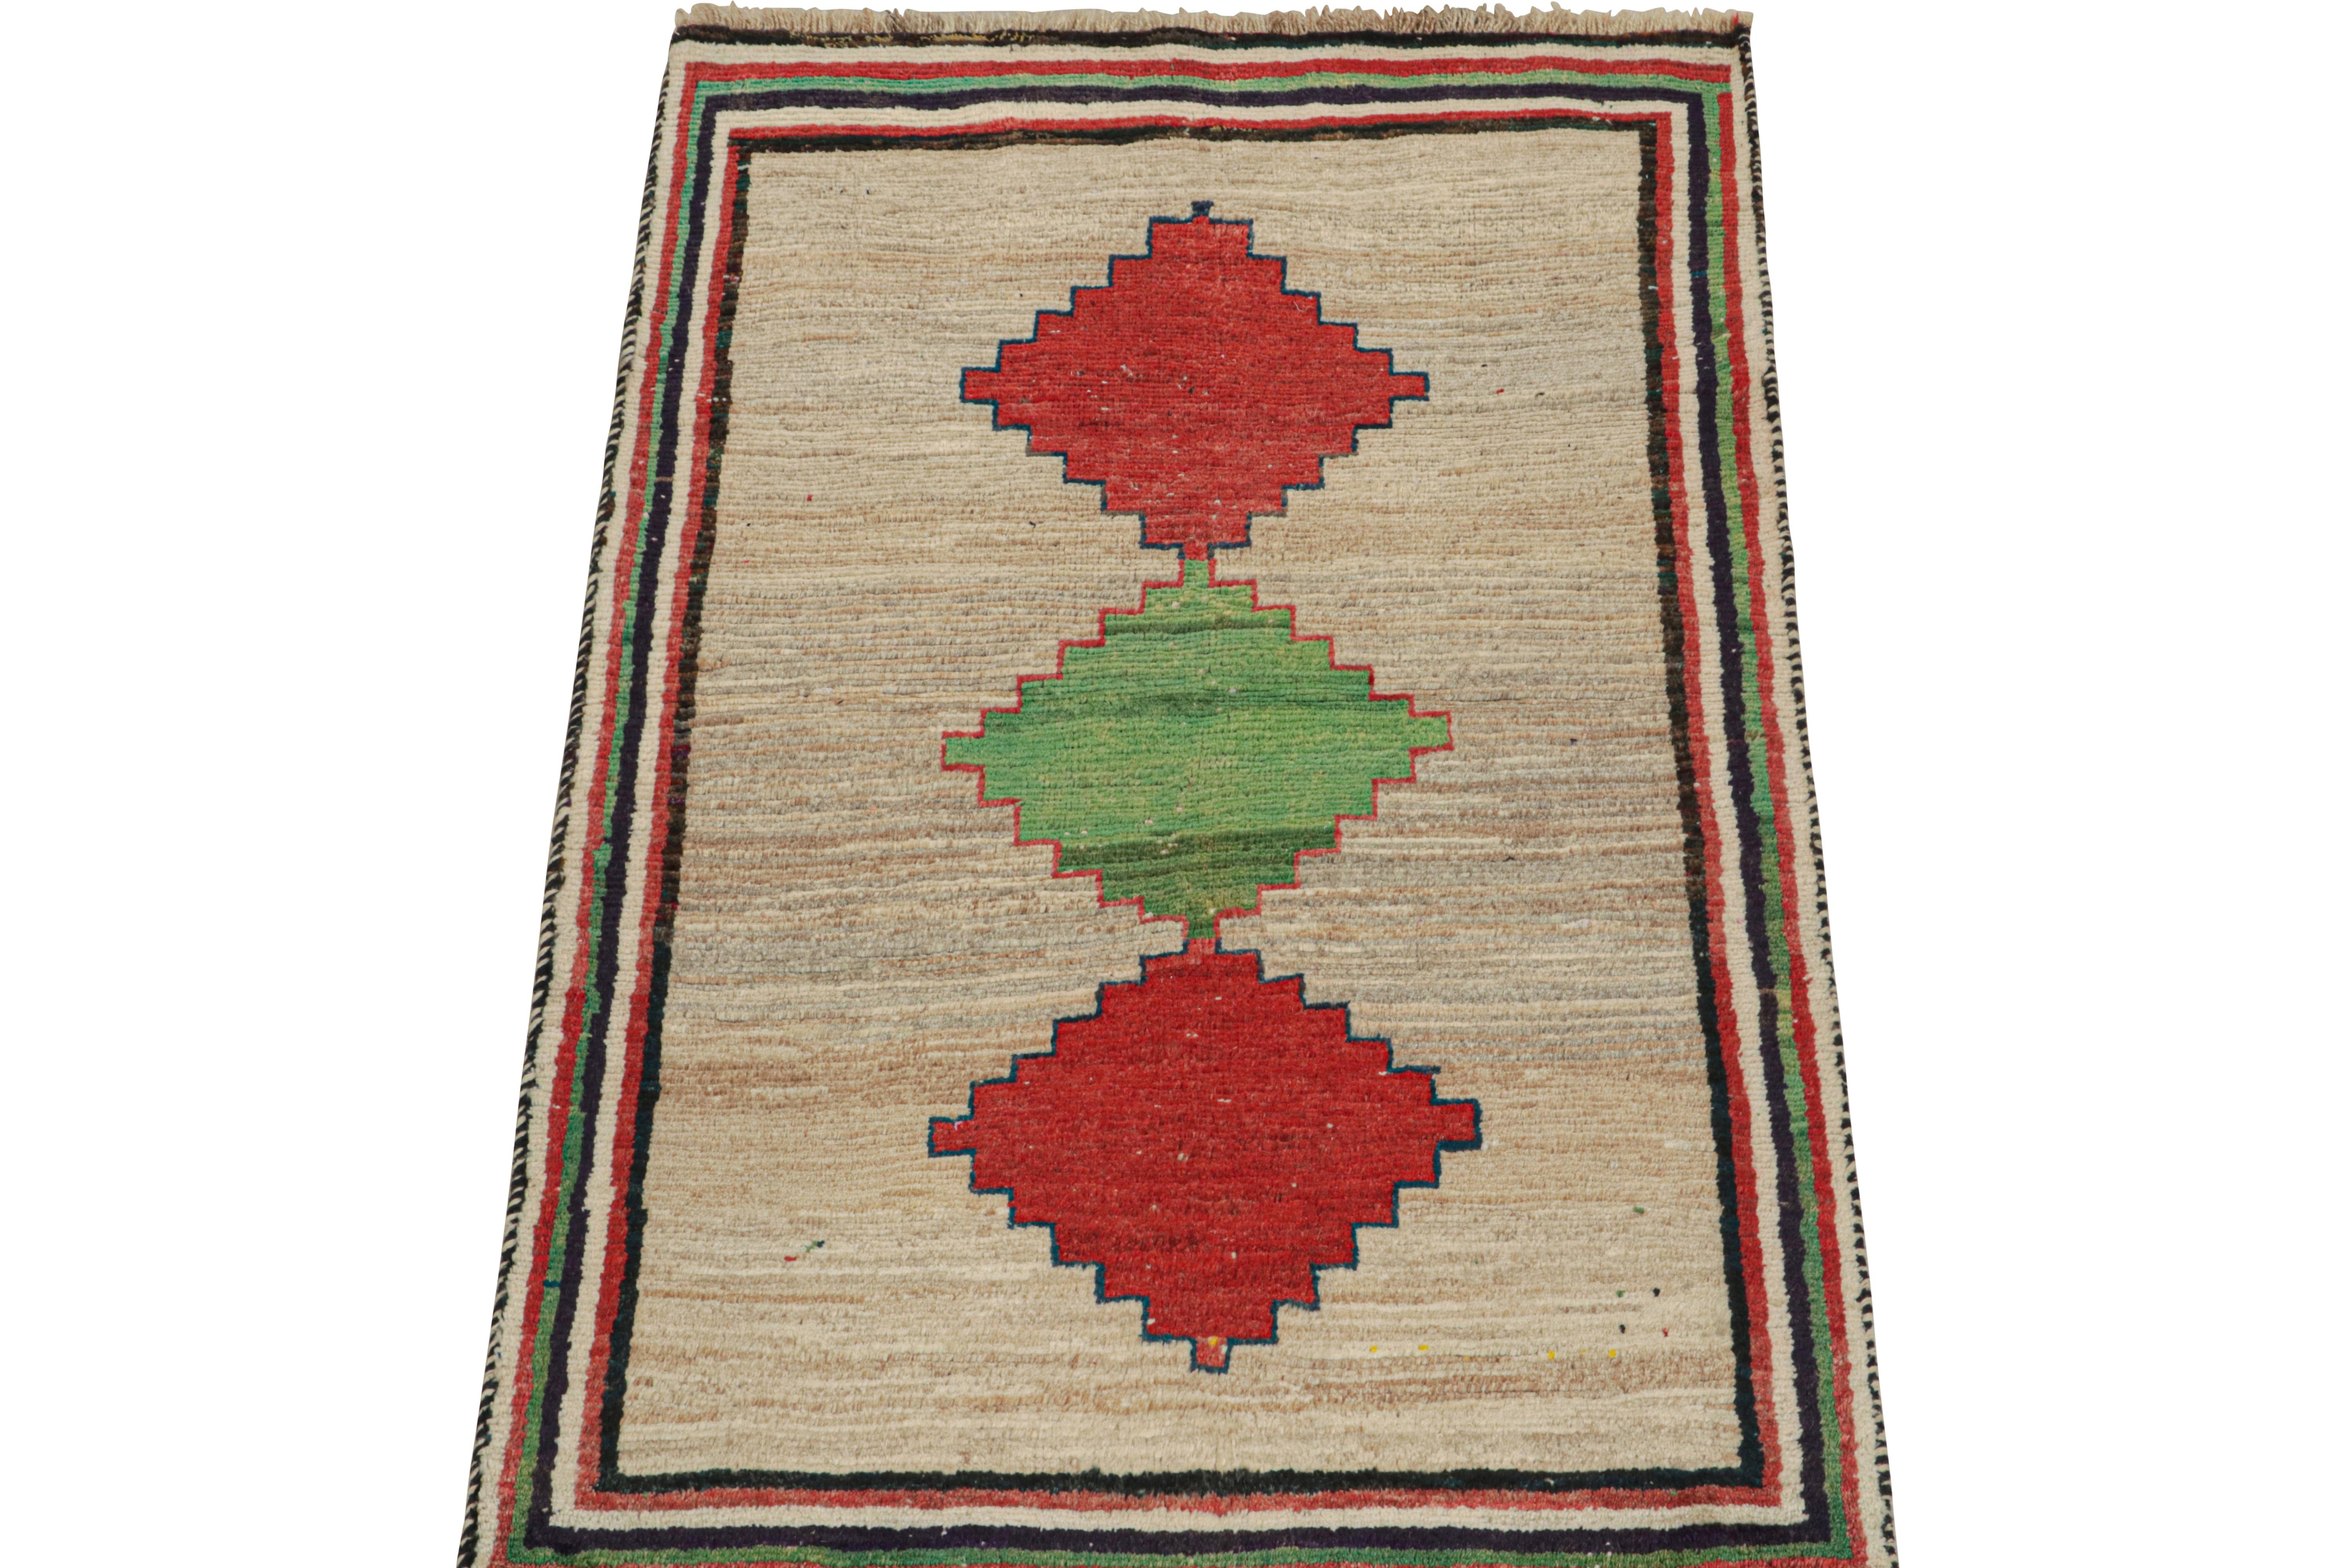 This vintage 3x6 Persian runner is a mid-century tribal piece, hand-knotted in wool circa 1950-1960.

Its design is a classic play of medallions over an open field—one of R&K Principal Josh Nazmiyal’s favorite styles. The medallions and borders